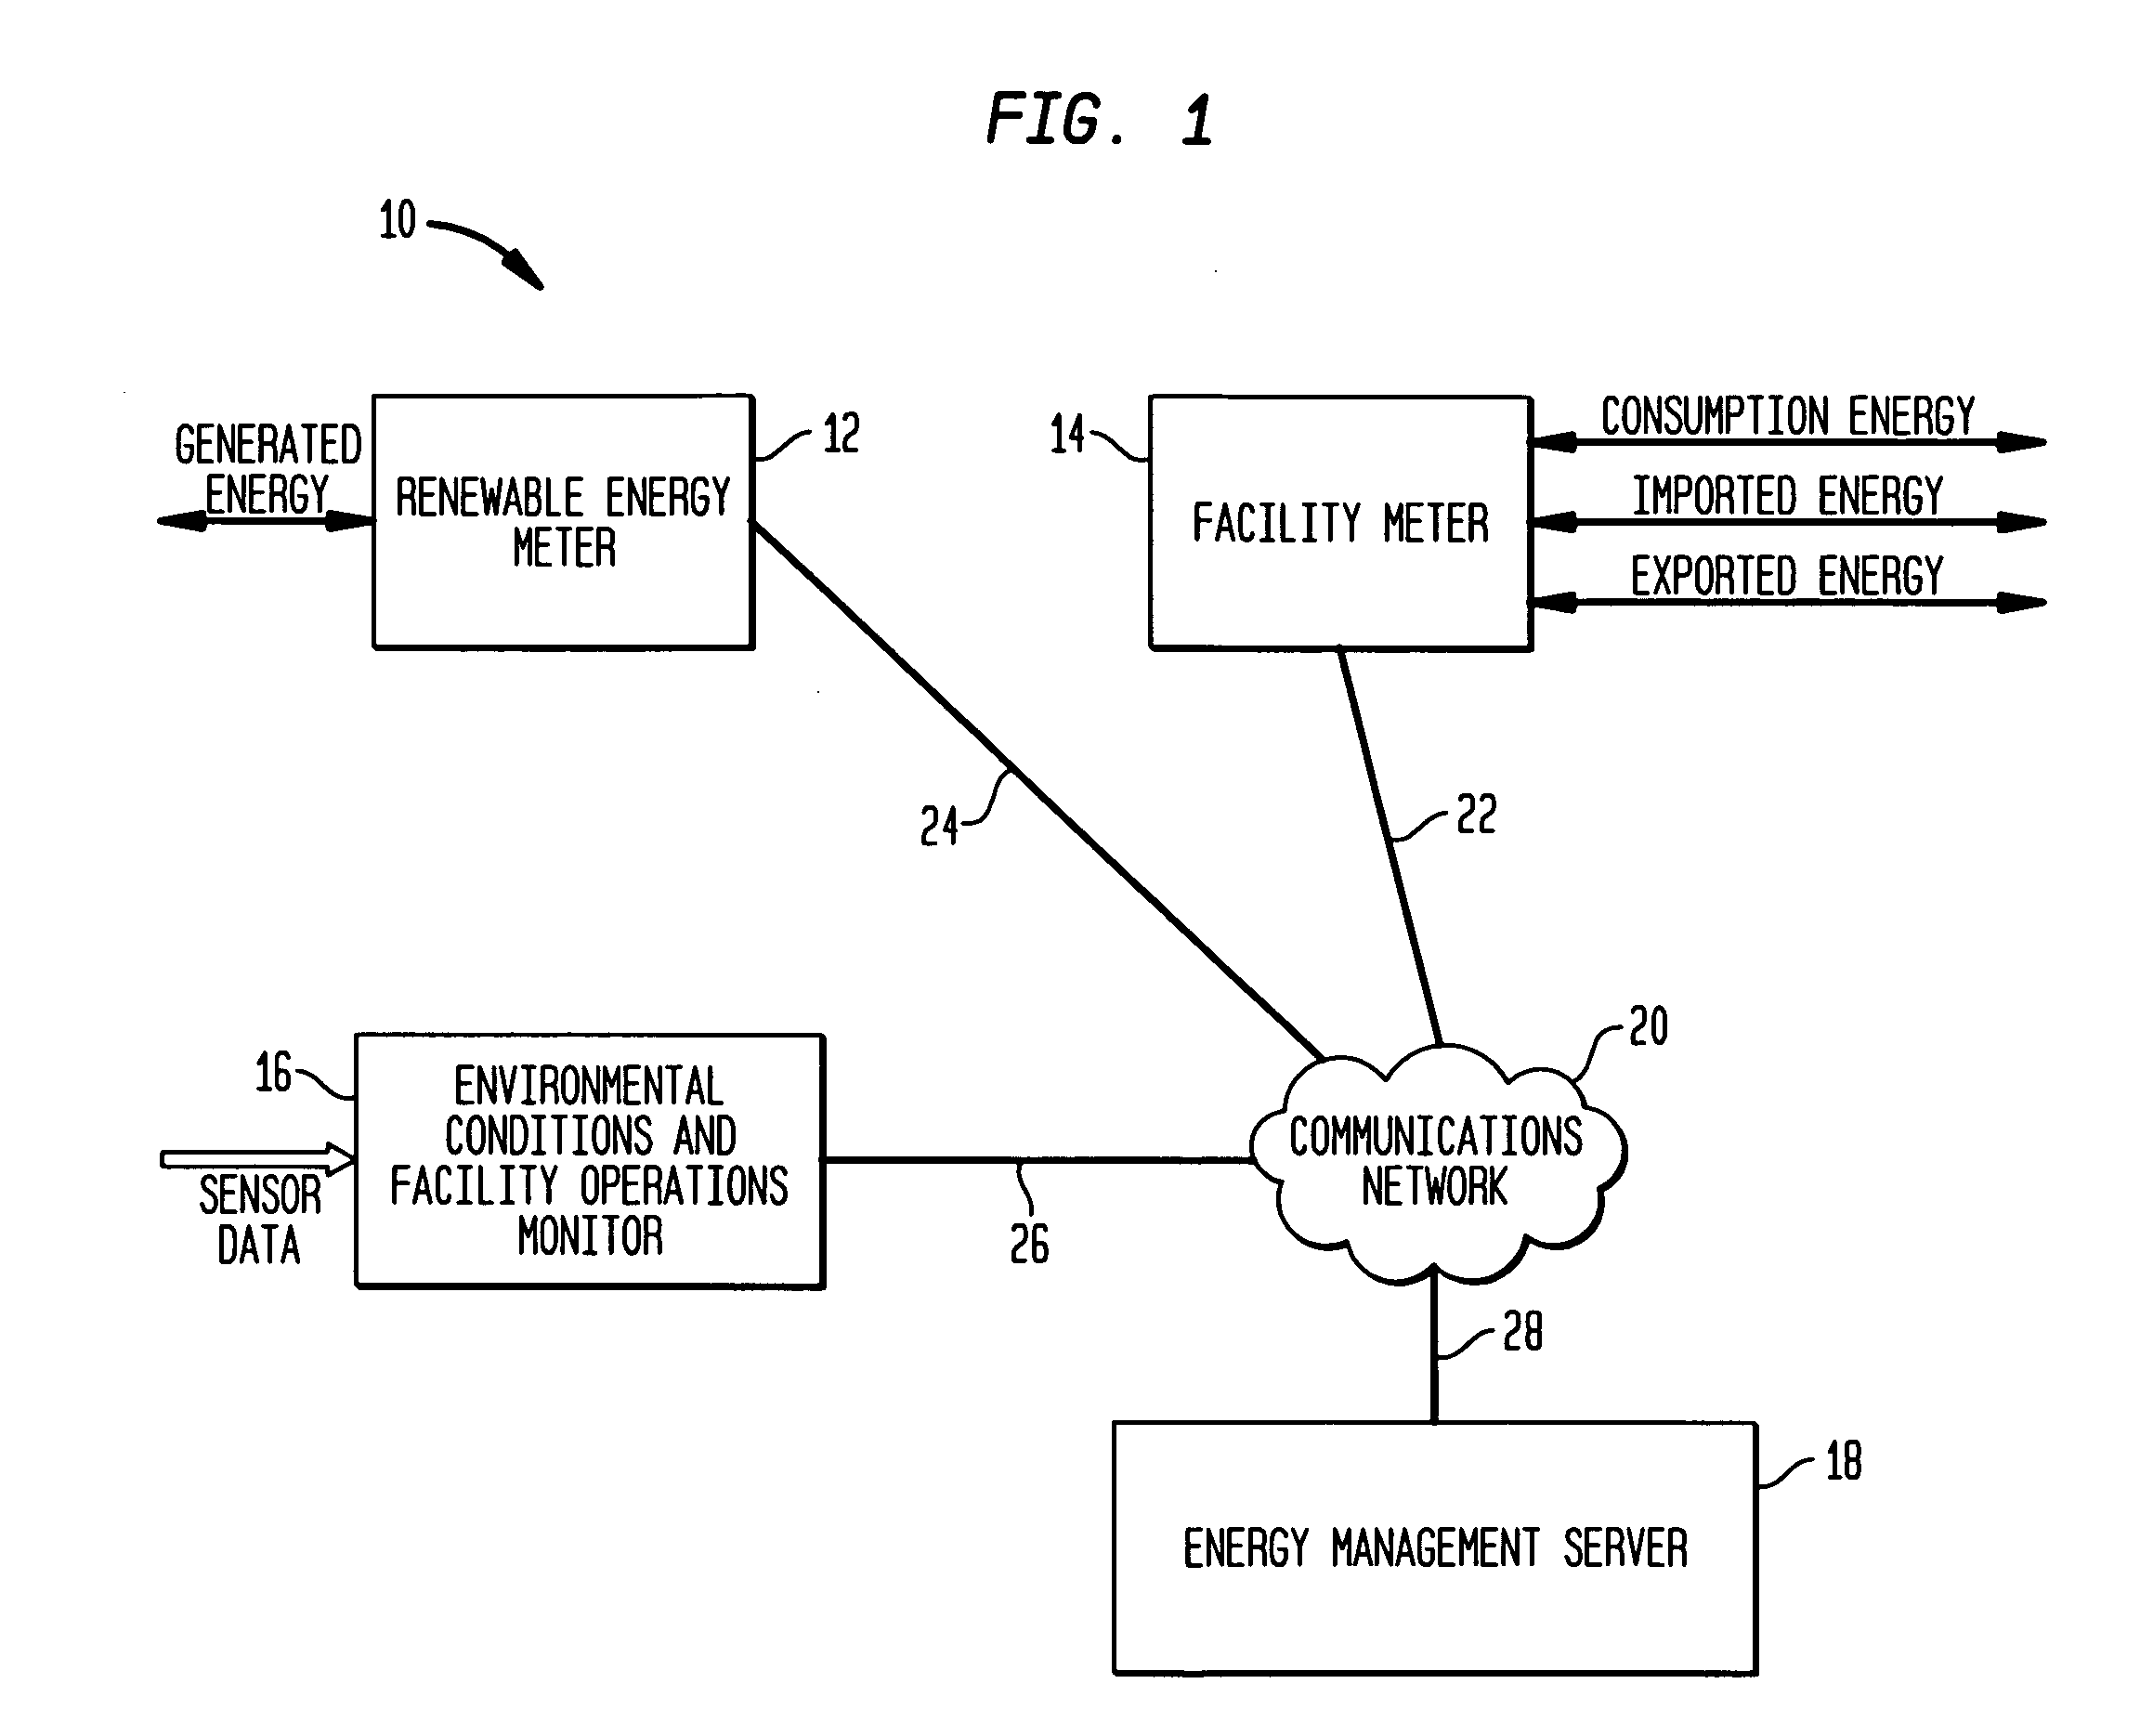 System and method for monitoring and managing energy performance